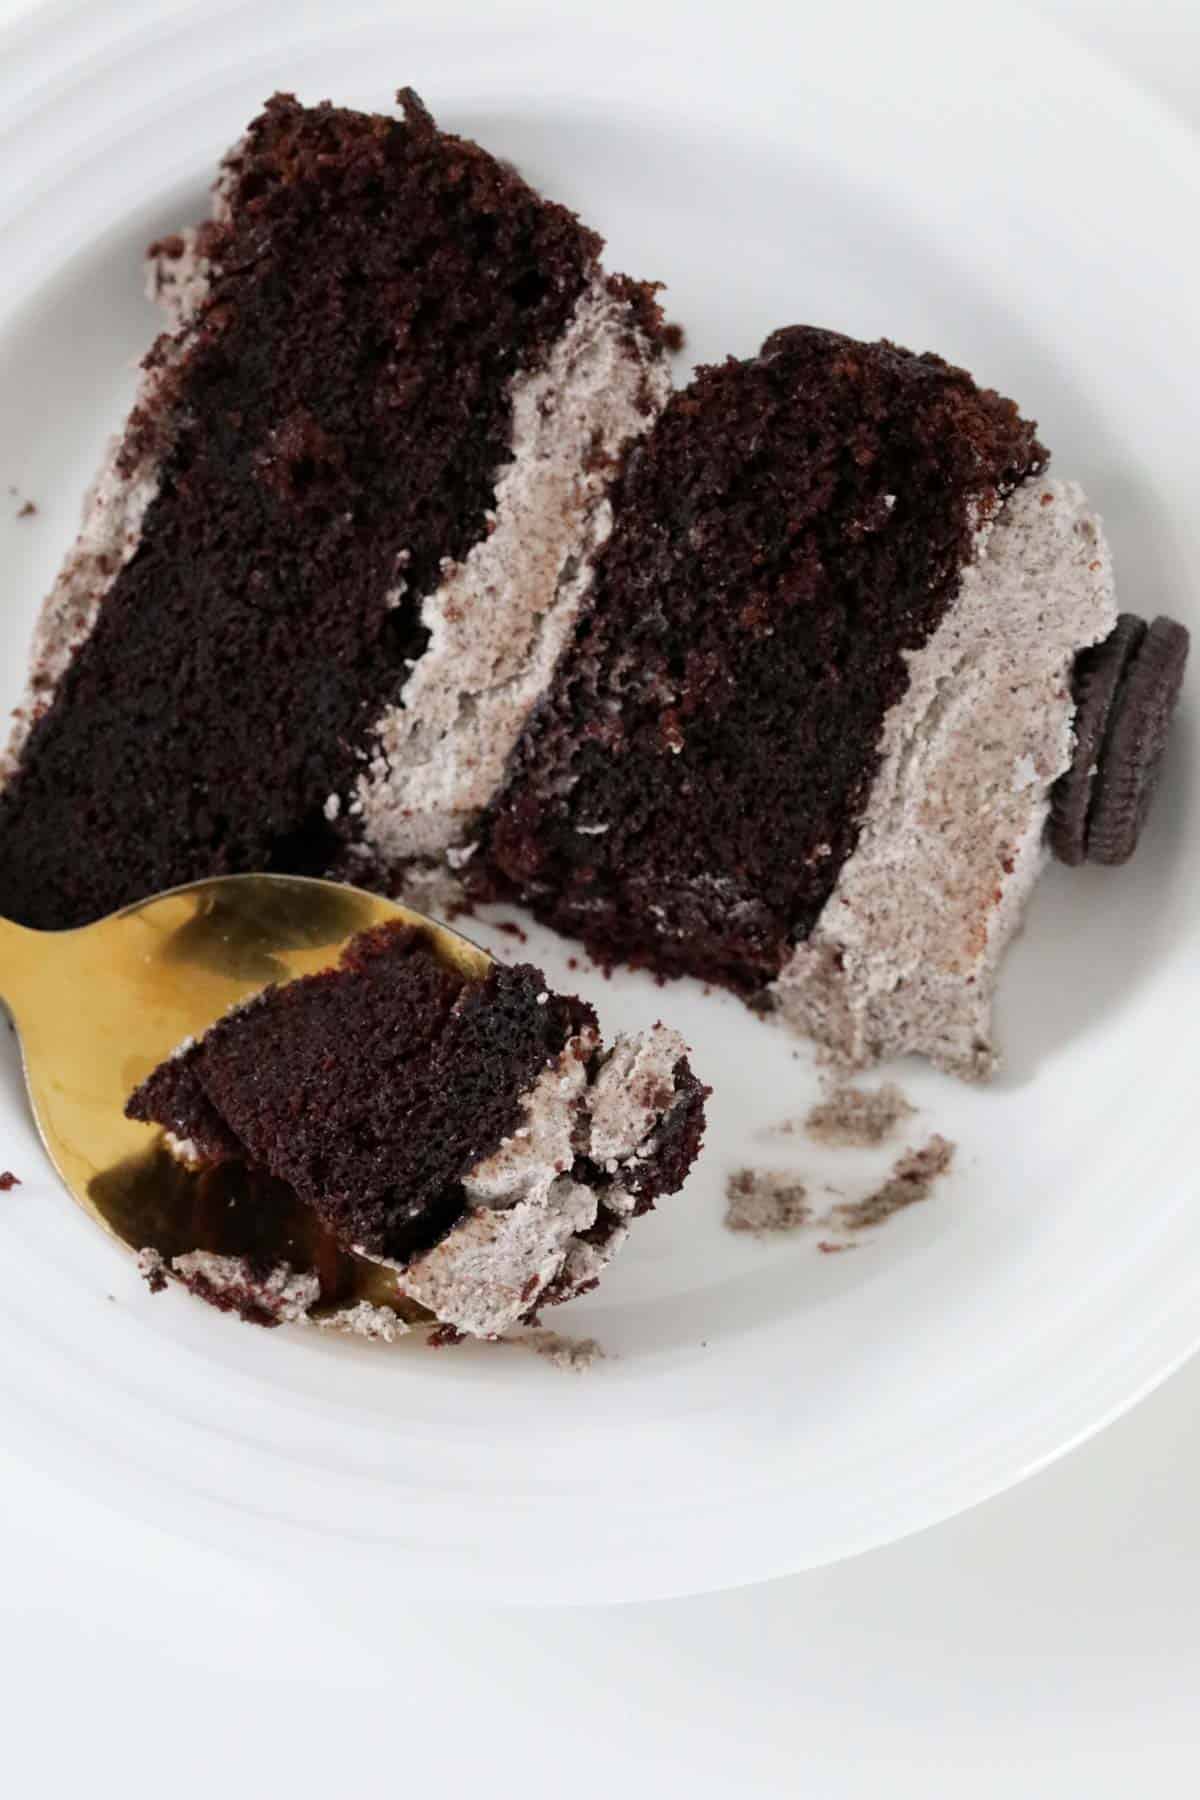 A half eaten piece of fudgy mud cake with Oreo frosting.